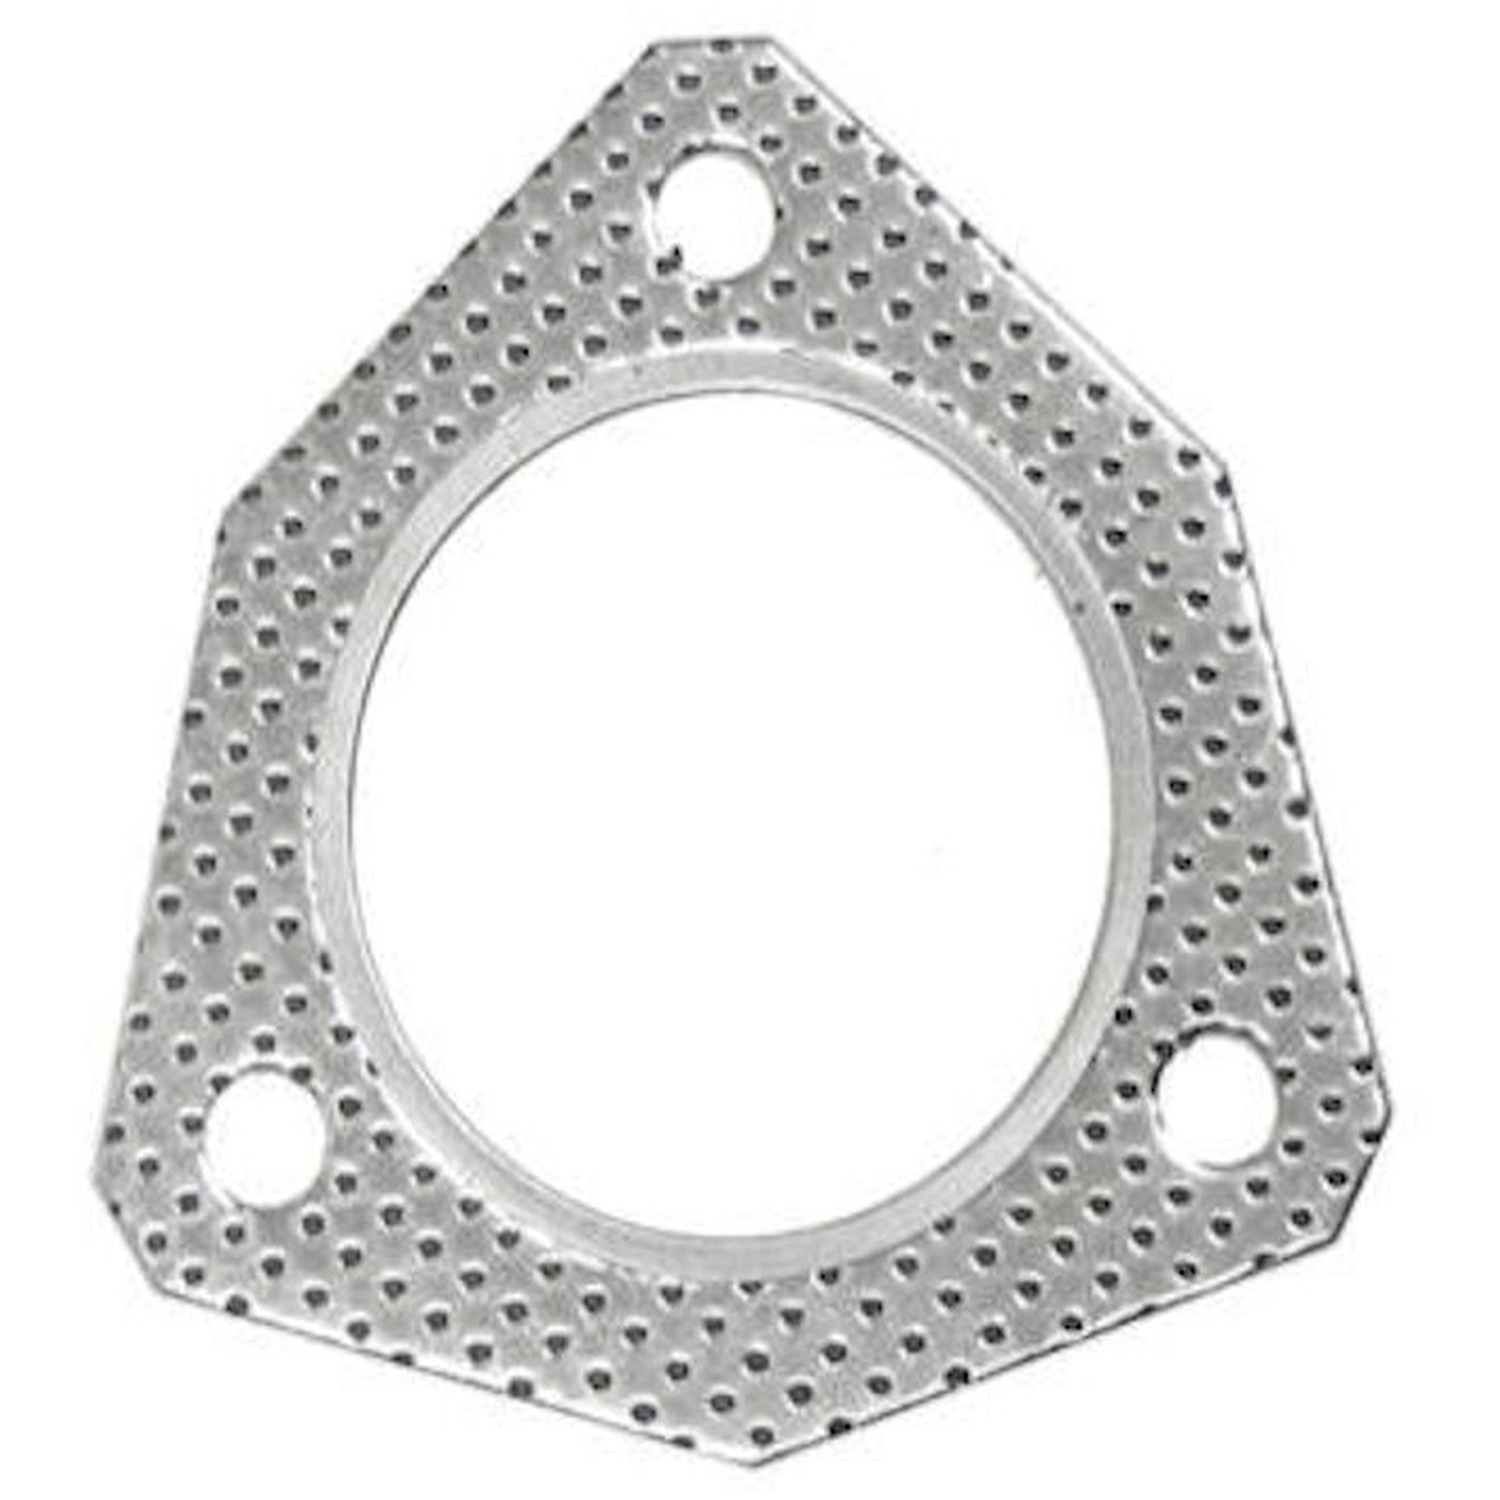 BREXHAUST 49 STATE CONVERTERS - Gasket (Outlet) - BSF 256-339